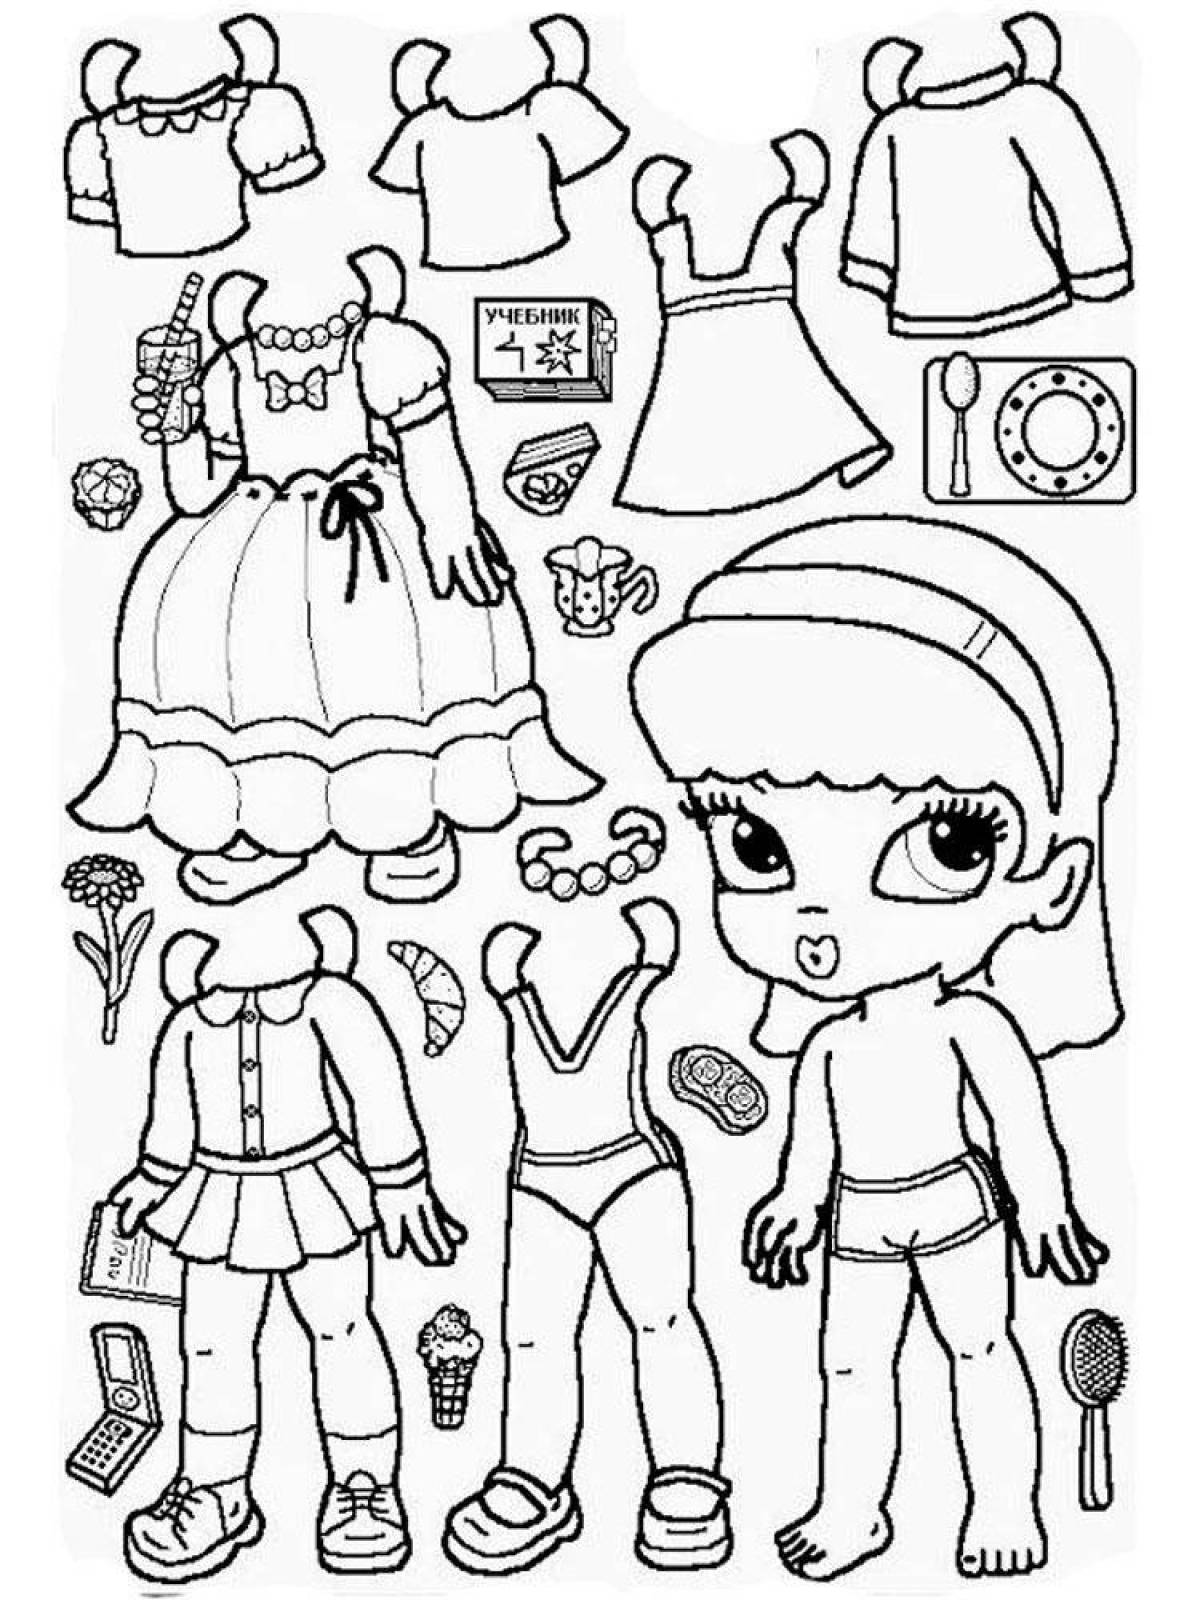 Amazing coloring book lol doll with clothes